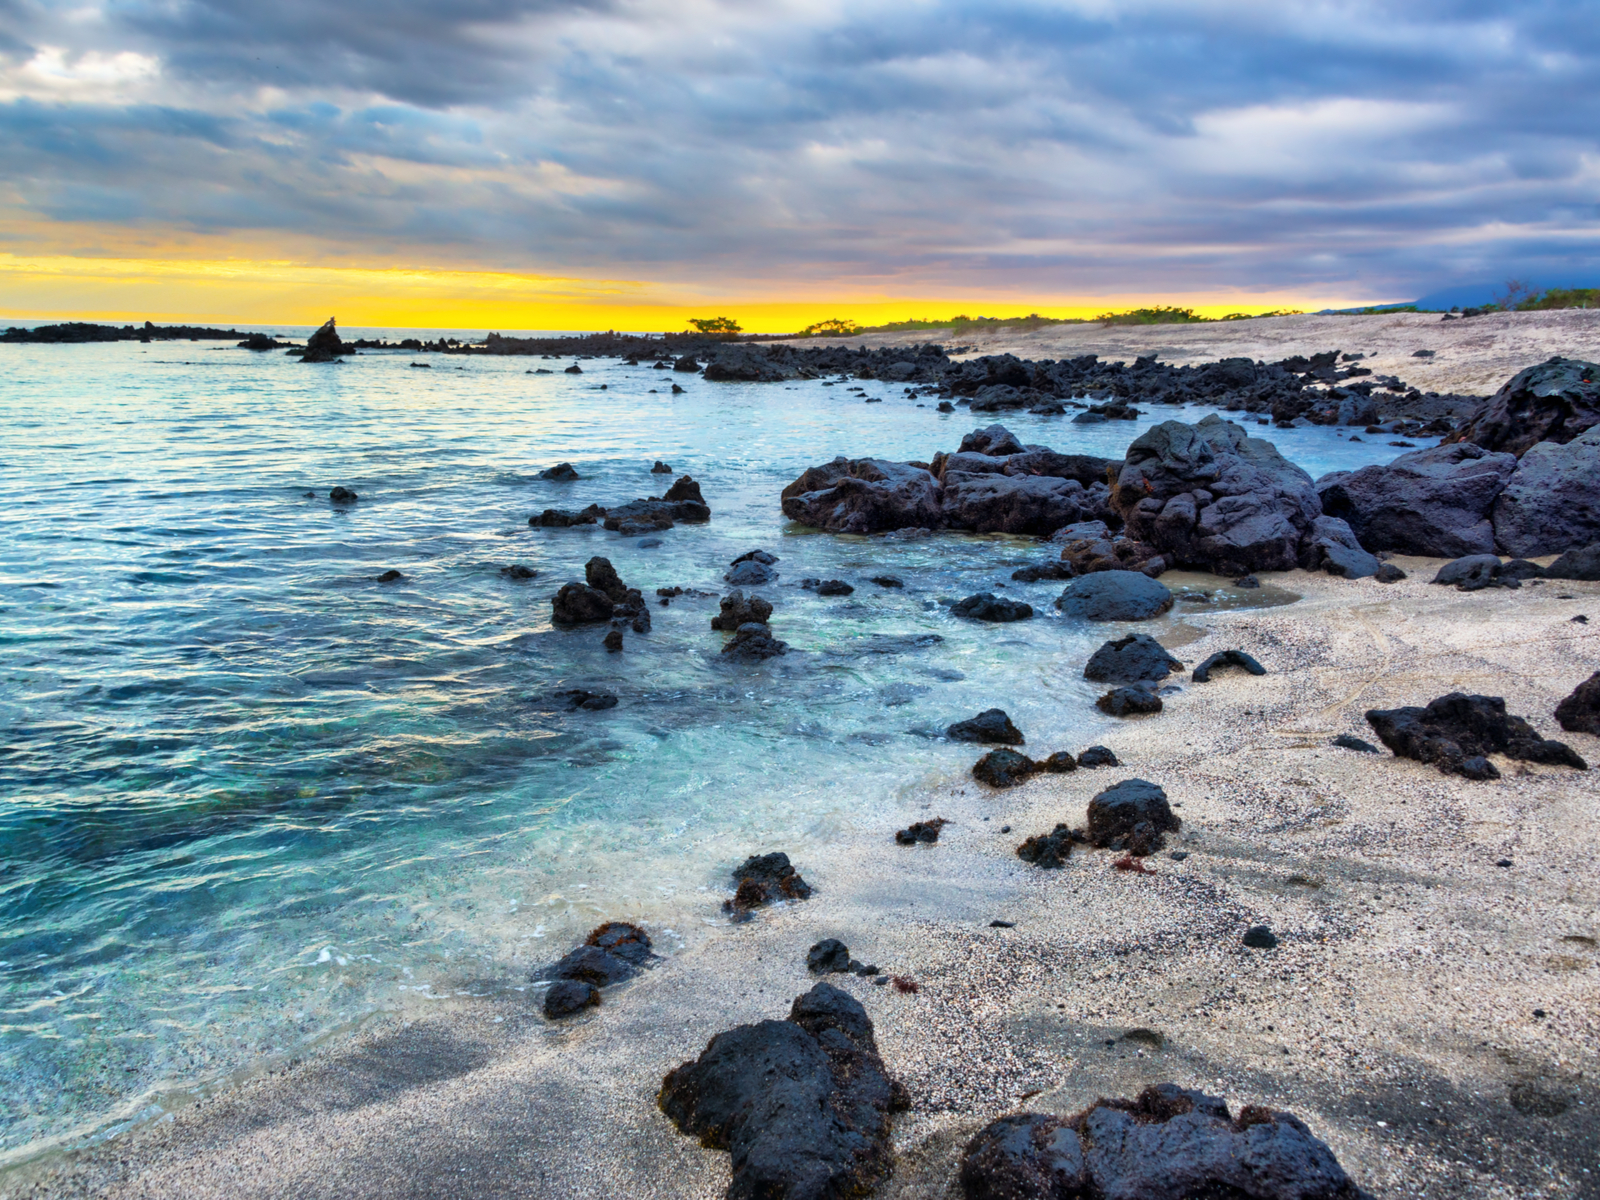 Rocks on the beach pictured with a sunrise during the best time to visit the Galapagos Islands